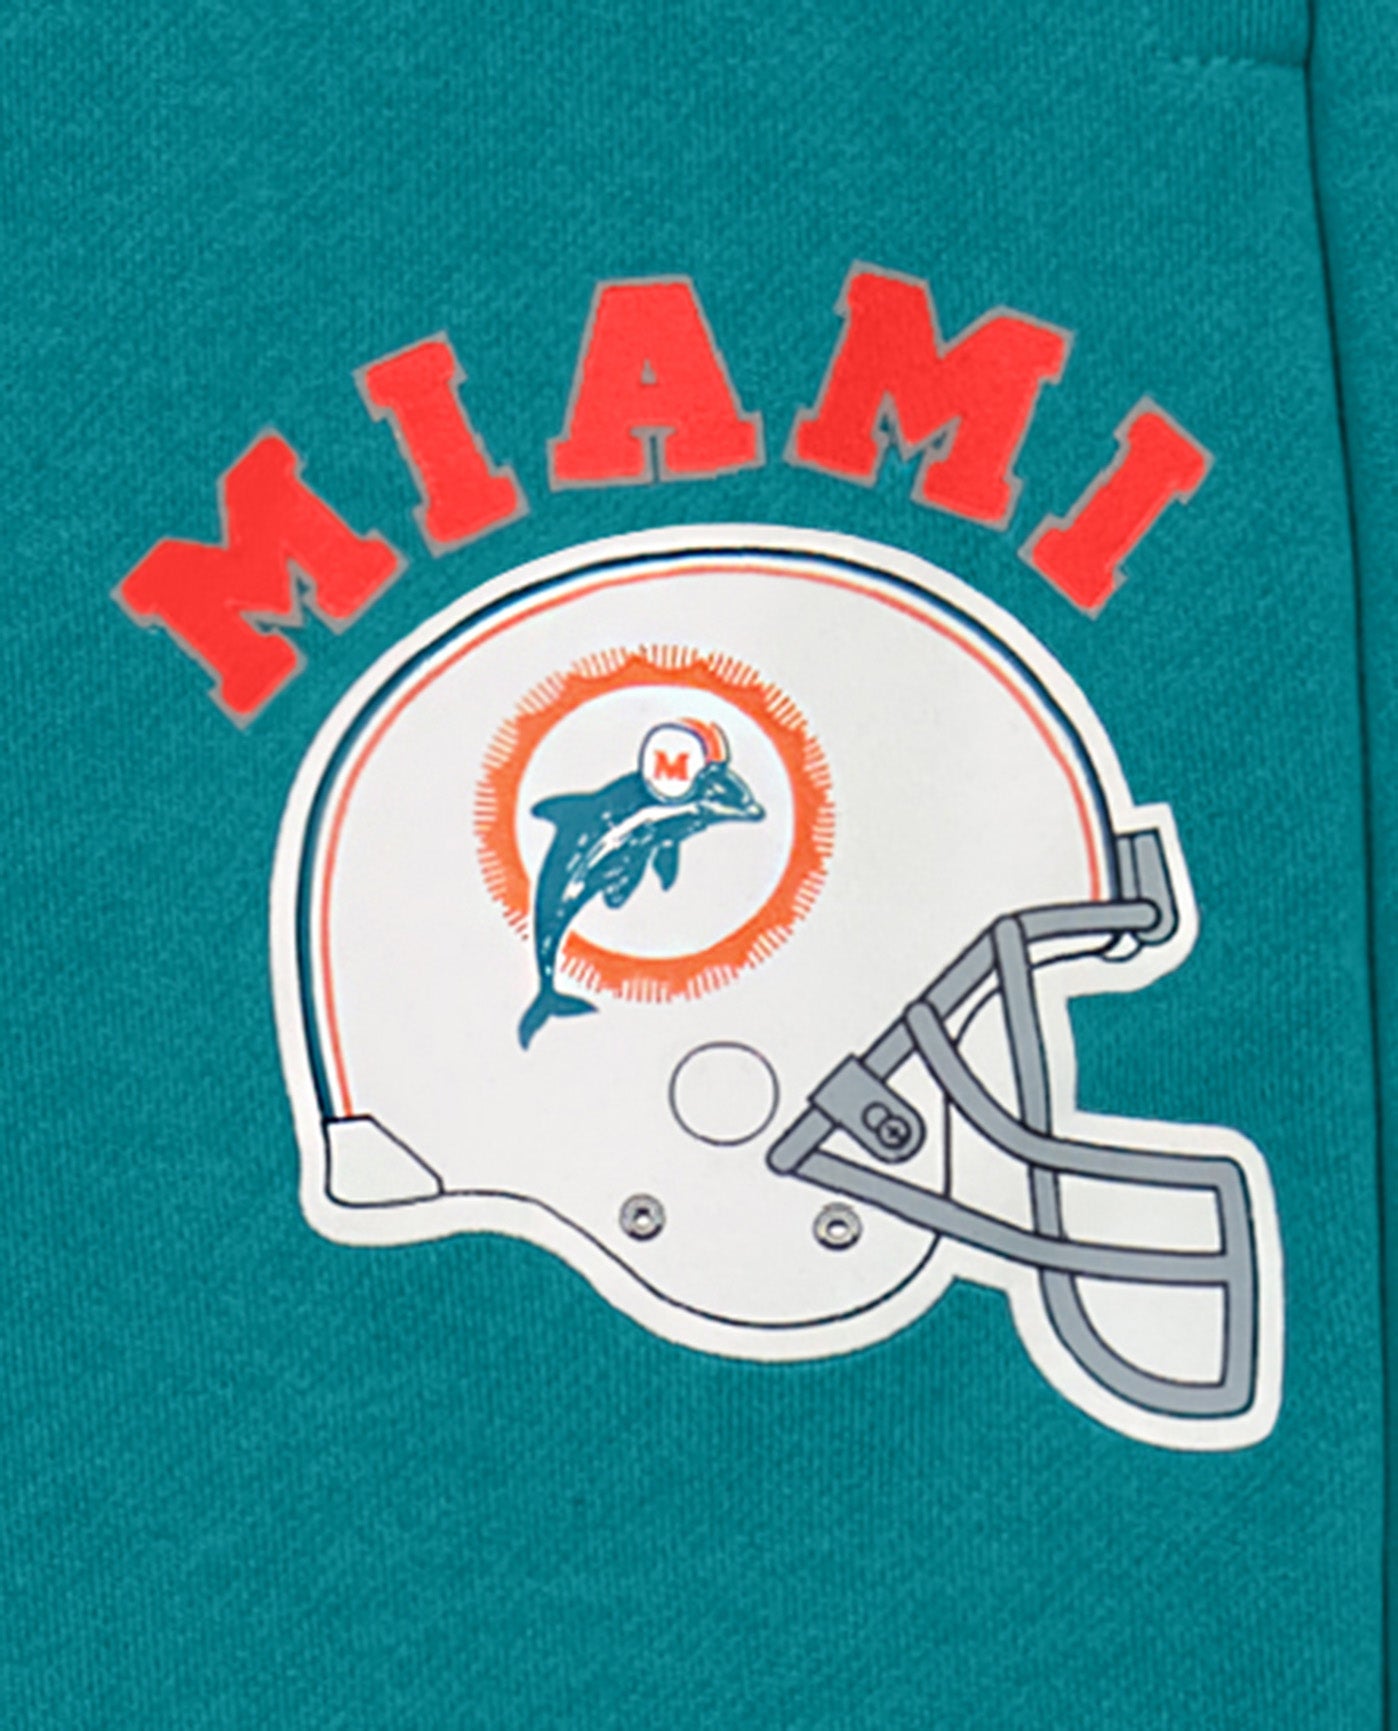 MIAME DOLPHINS writing and helmet logo front | Dolphins Aqua